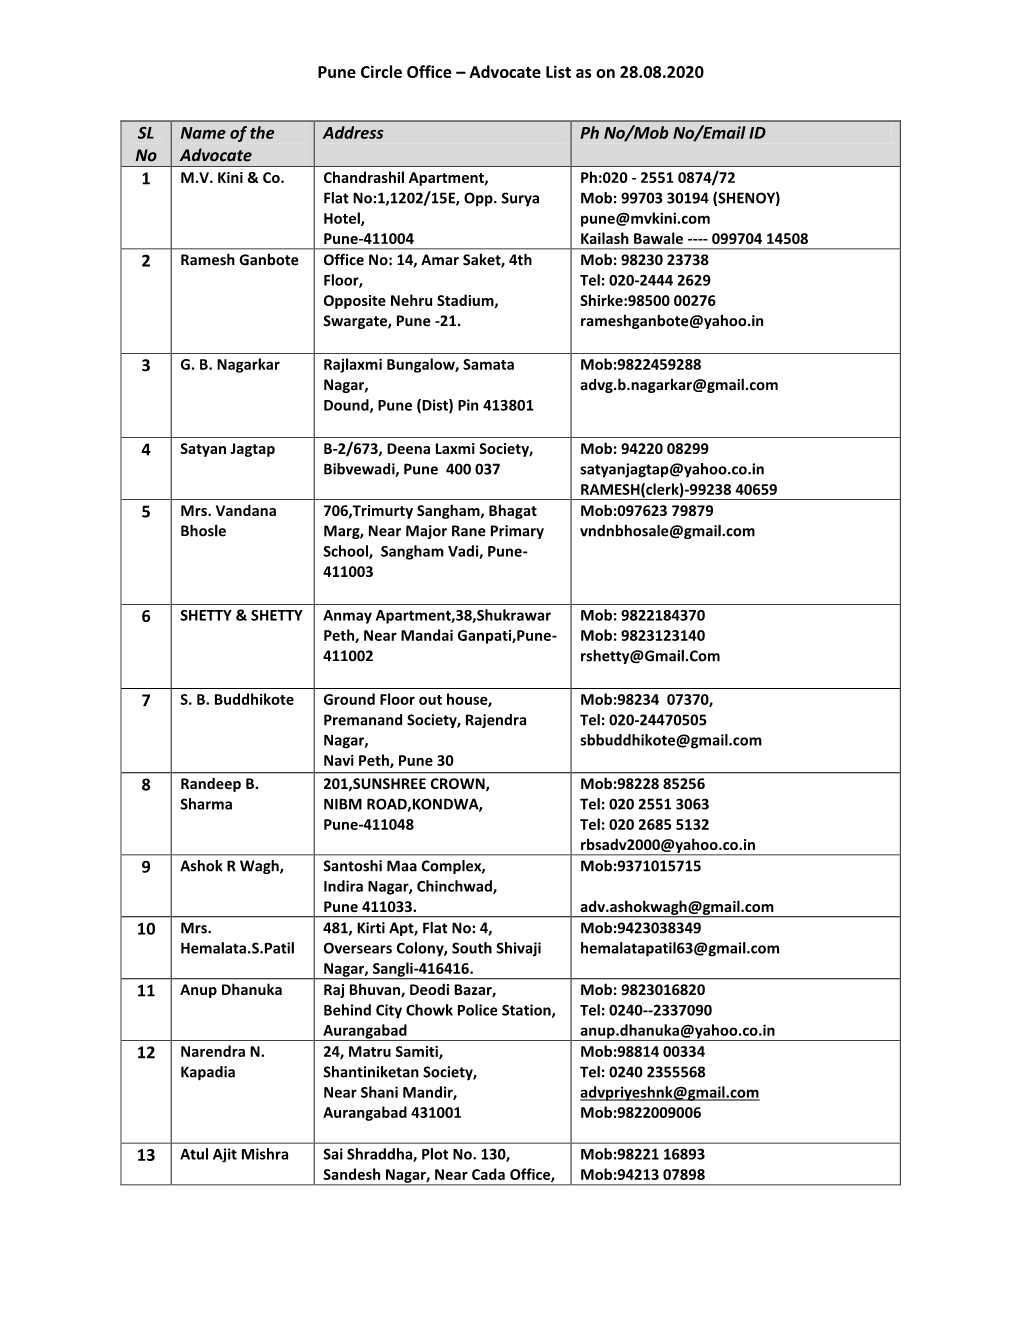 Pune Circle Office – Advocate List As on 28.08.2020